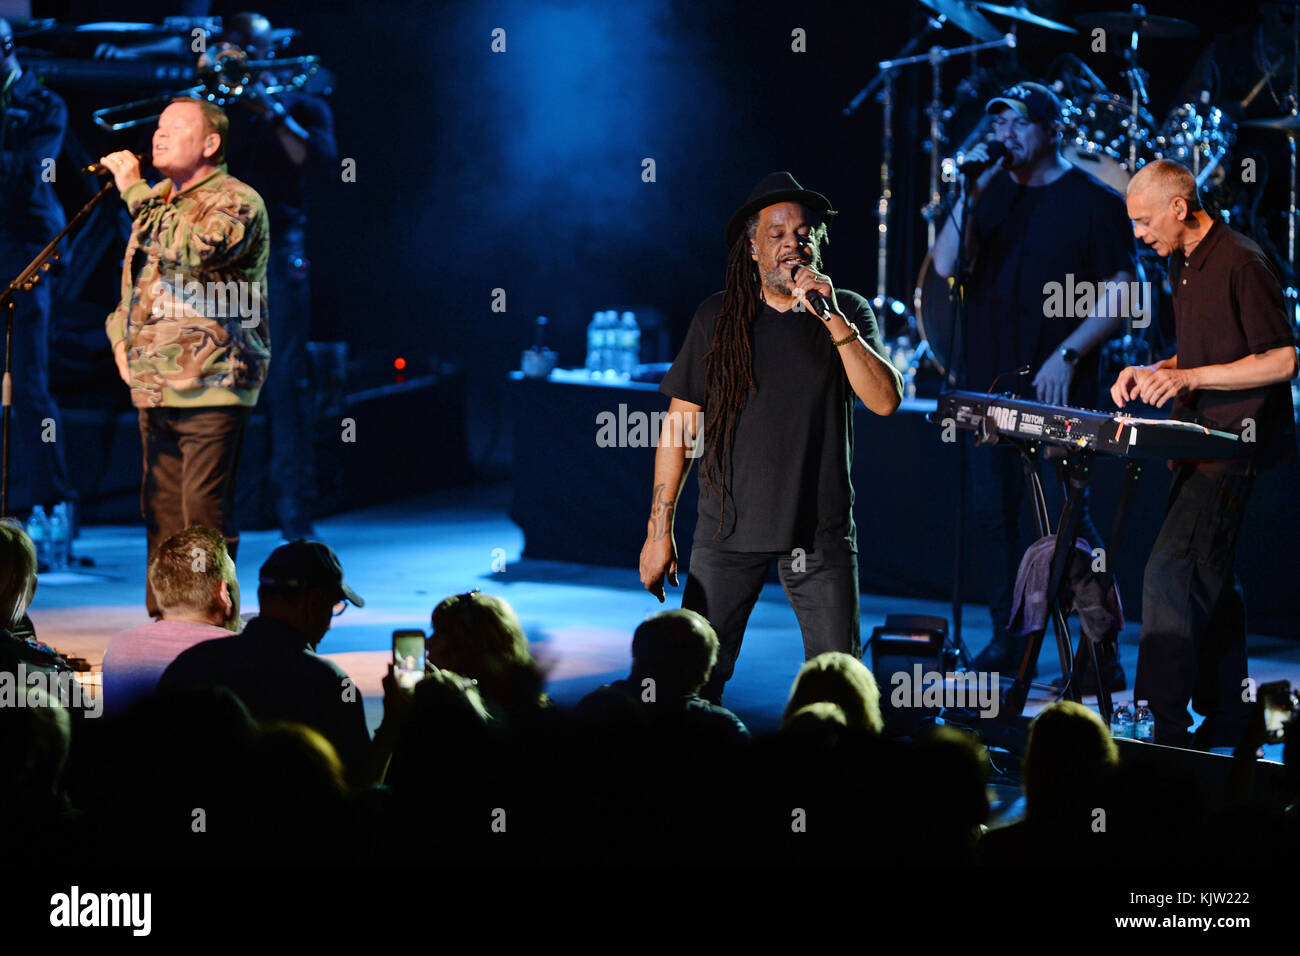 POMPANO BEACH FL - AUGUST 15: Ali Campbell of UB40 performs at The Pompano Beach Amphitheater on August 15, 2016 in Pompano Beach, Florida.    People:  Ali Campbell, Astro, Mickey Virtue Stock Photo